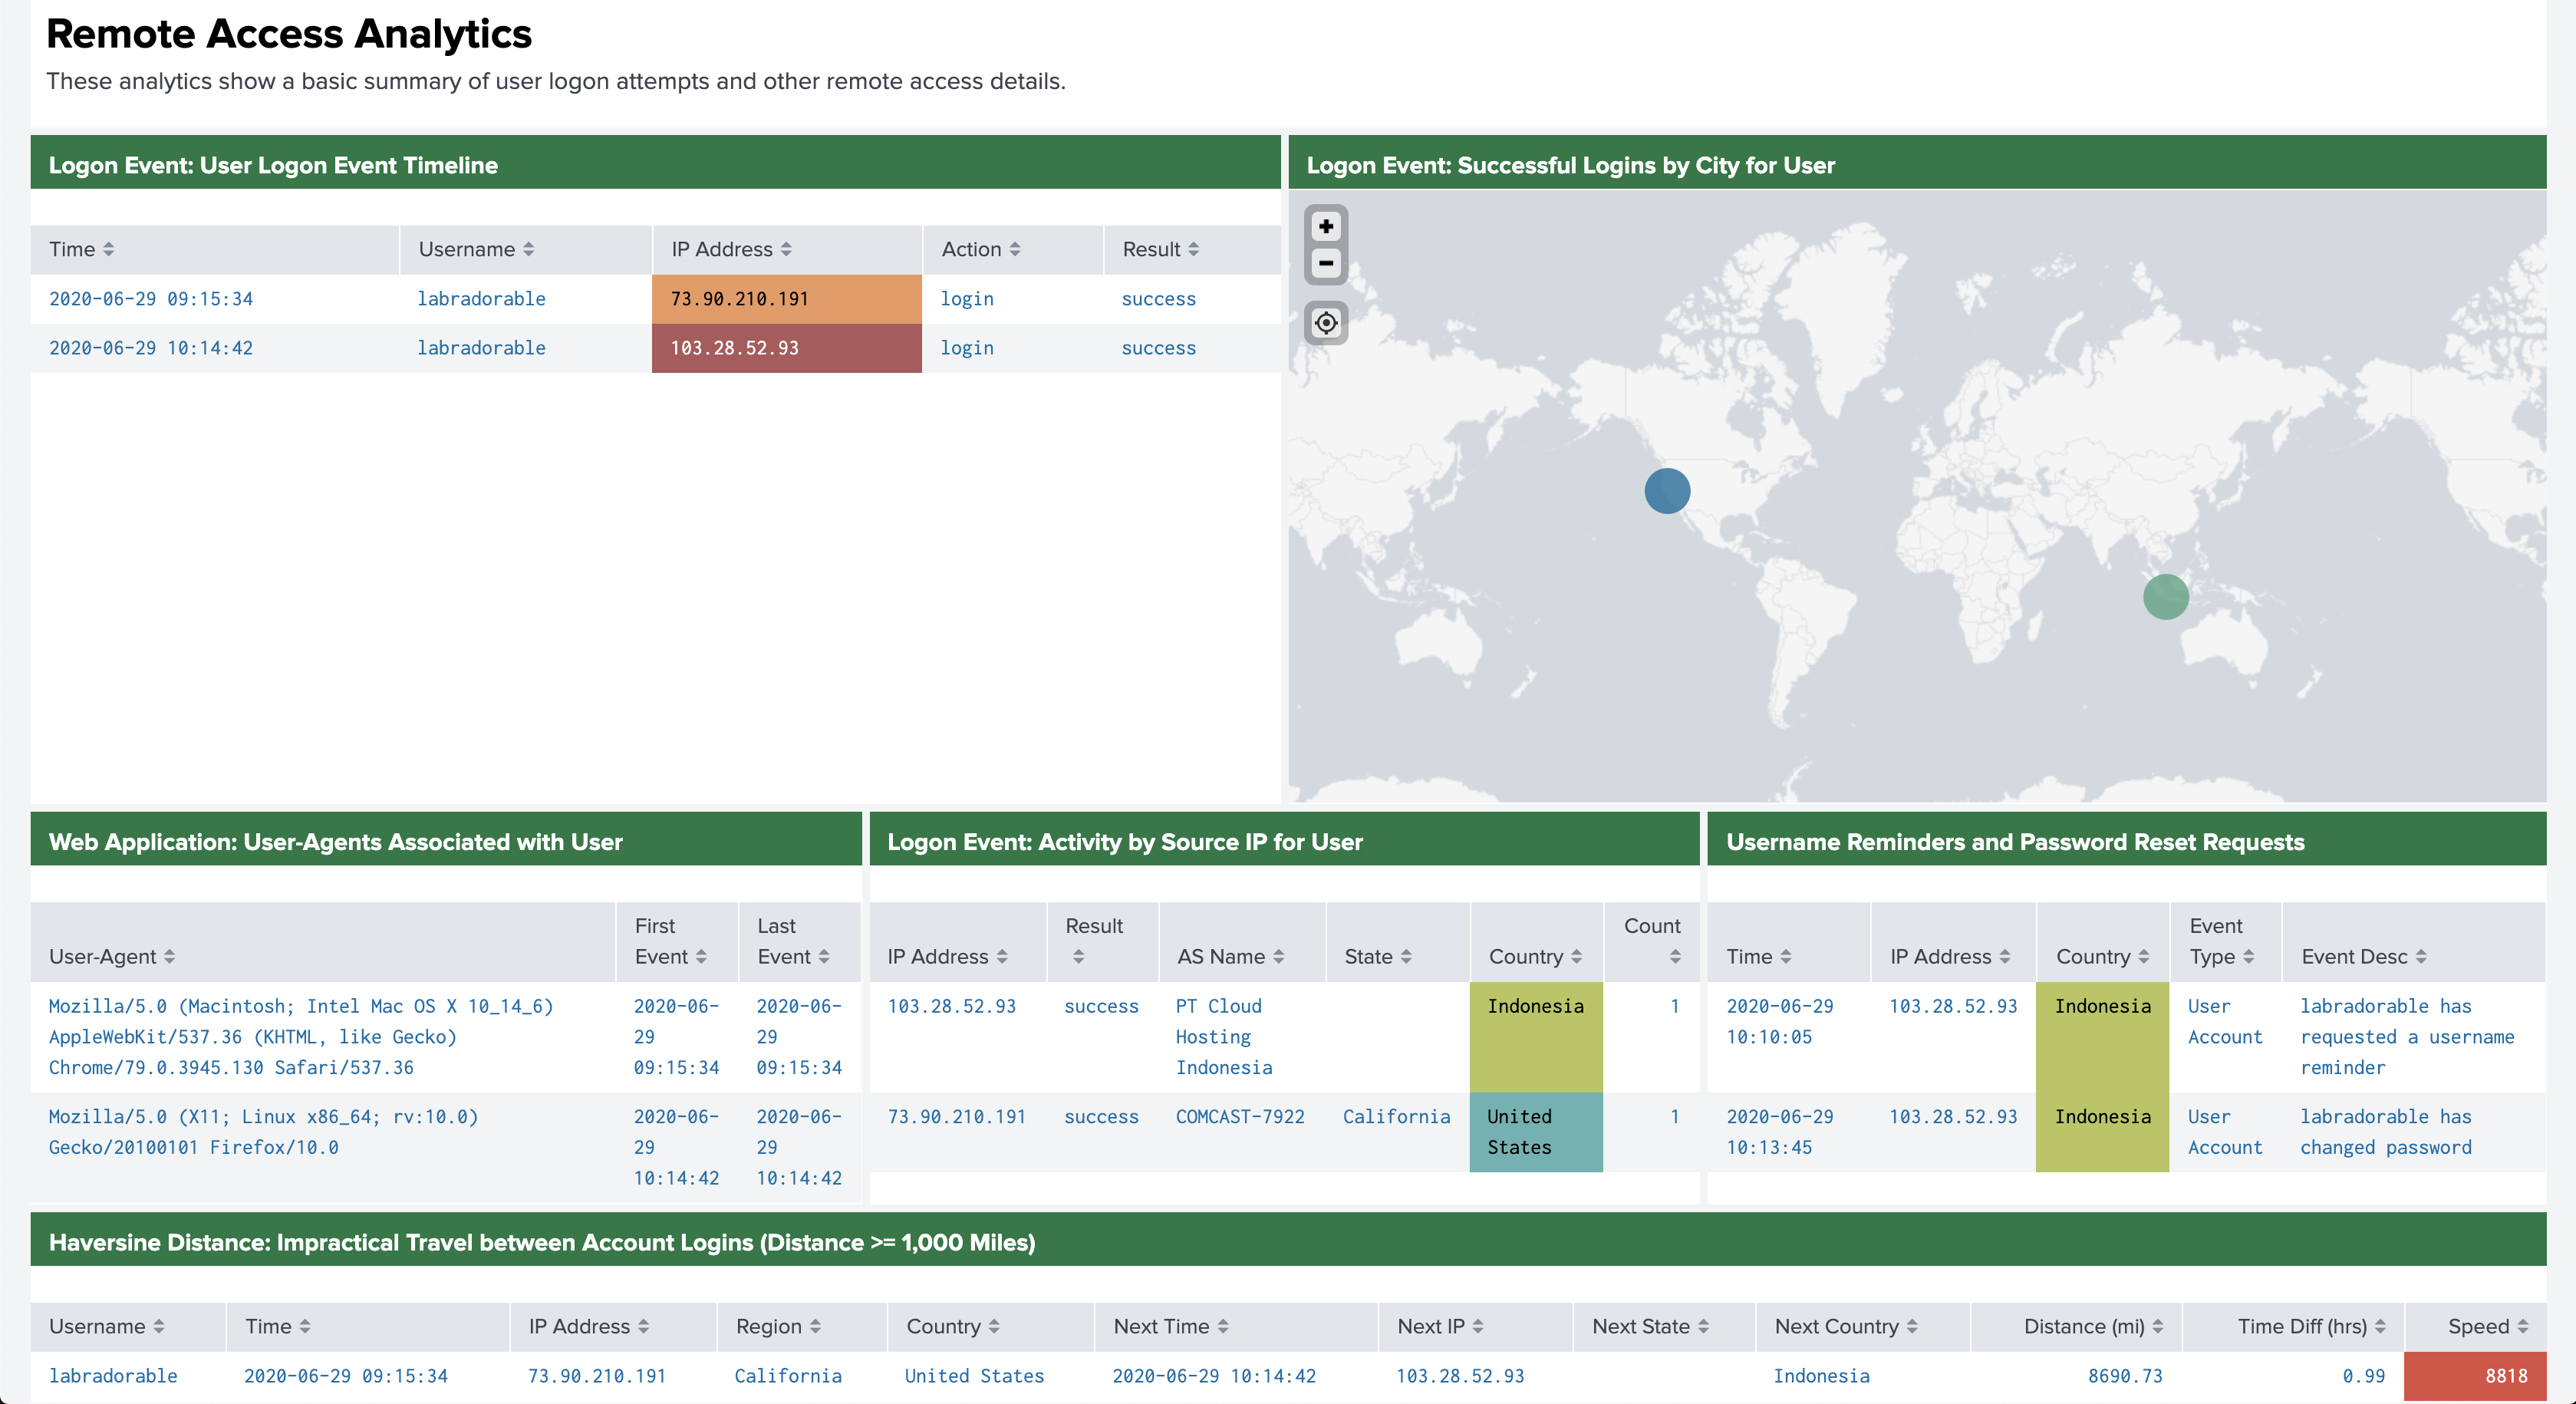 Remote access analytics based on user activity